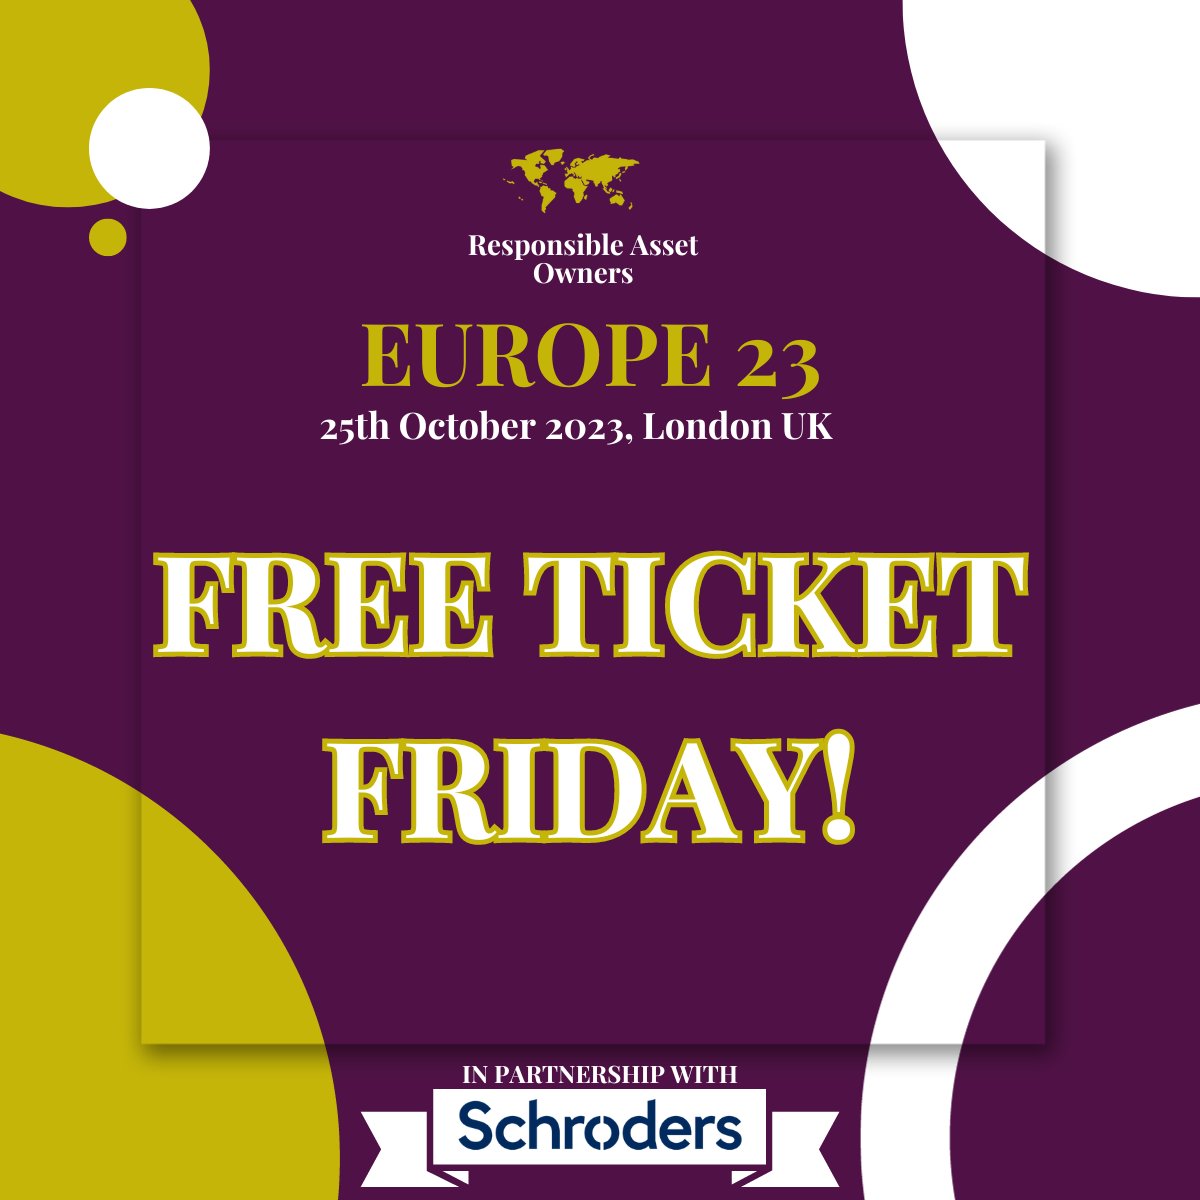 🎉 It's Free Ticket Friday! 🎉 We're giving away 1x FREE ticket to RAO Global Europe 2023! Don't miss this chance to be a part of Europe's premier event. Comment with #RAOGlobalEurope and tag 3 people for your chance to win #FreeTicketFriday #RAOGlobalEurope